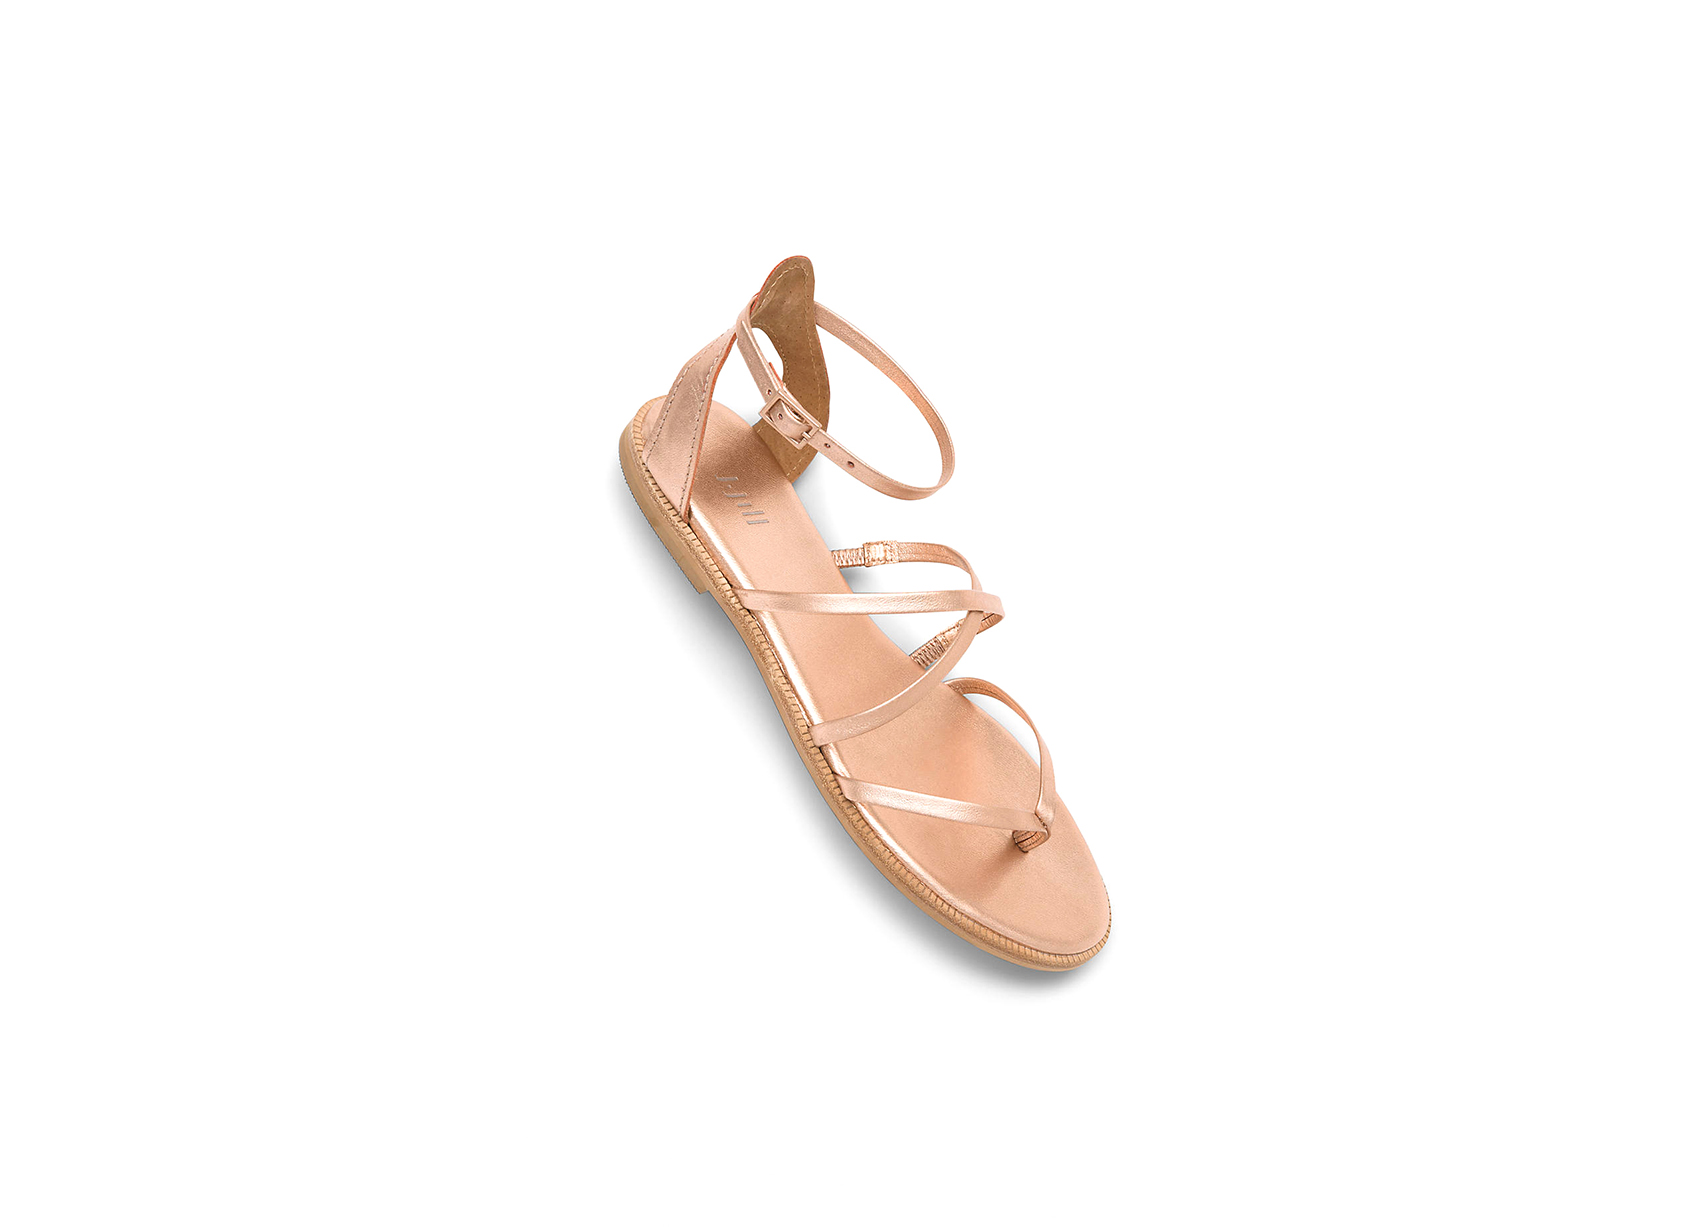 J.Jill Rose Gold Strappy Sandals